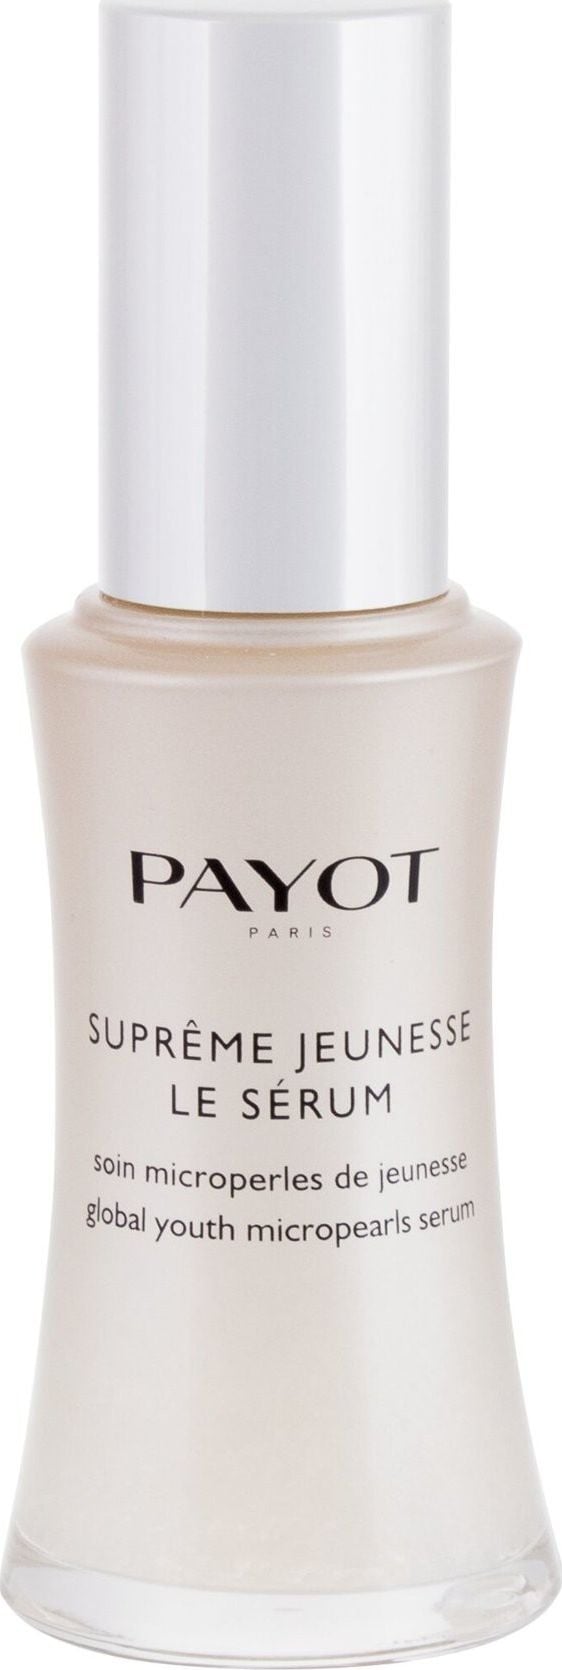 Payot PAYOT Supreme Jeunesse Global Youth Micropearls Face Serum 30ml